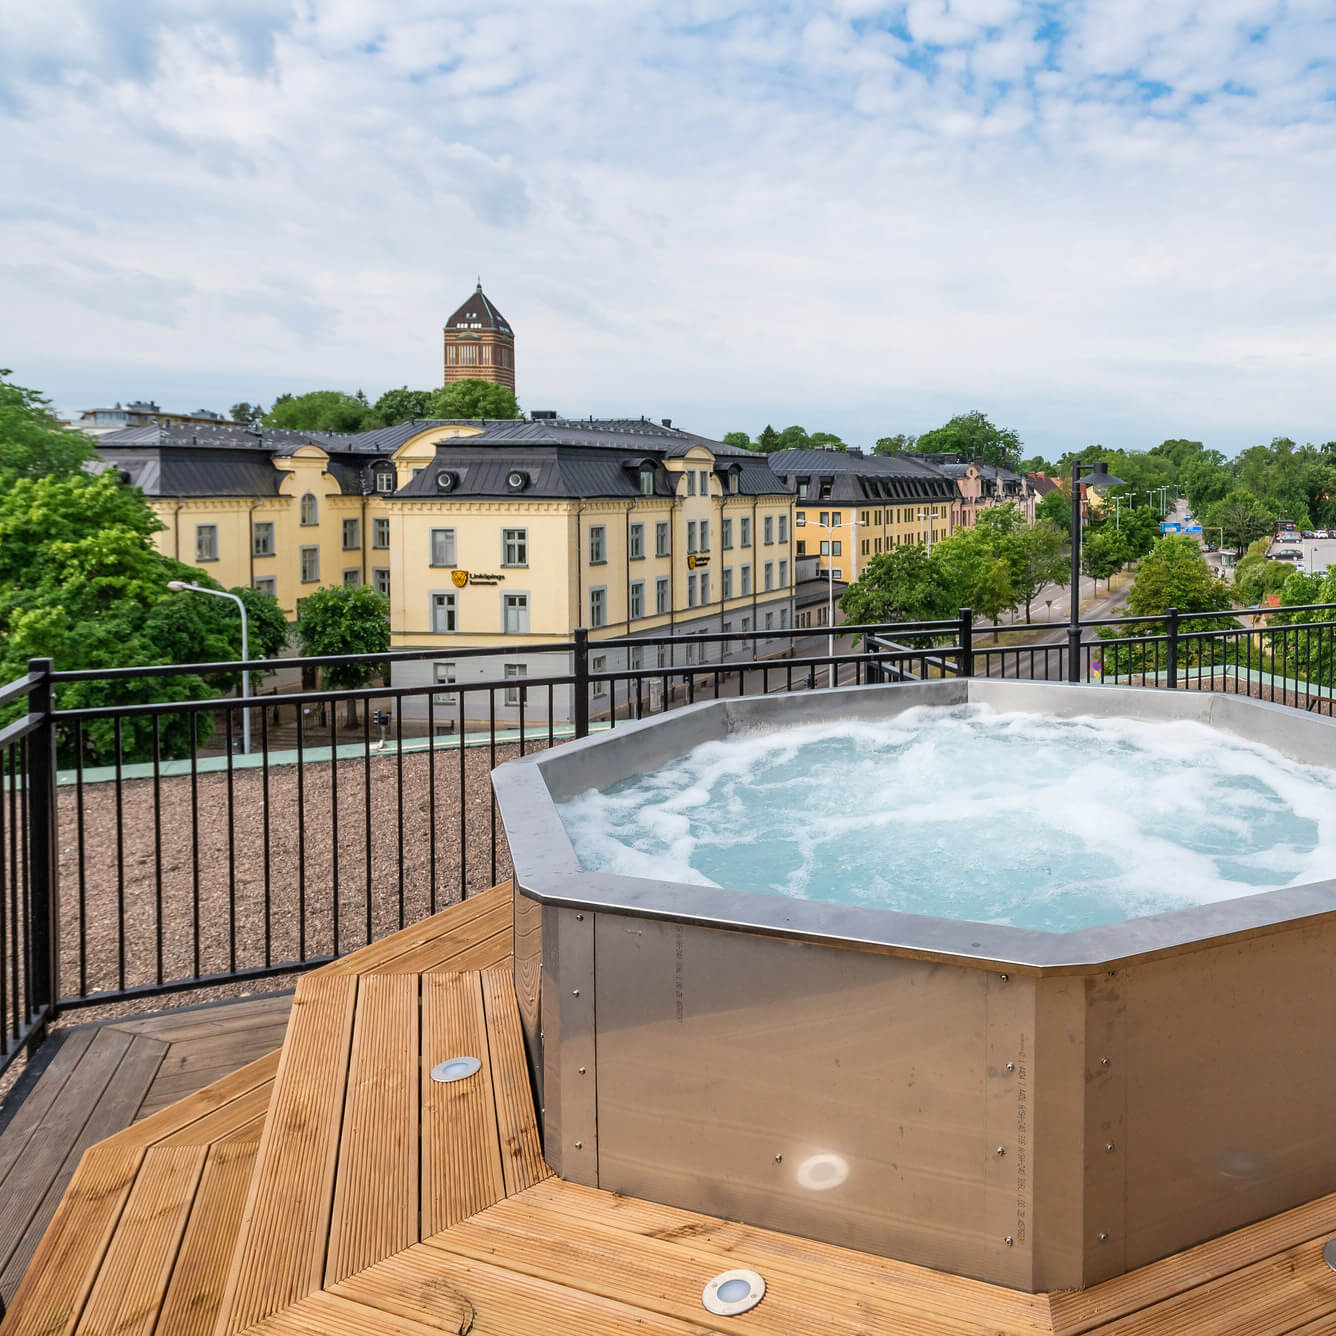 Jacuzzi on the rooftop at Clarion Collection Hotel® Slottsparken, with a city view.